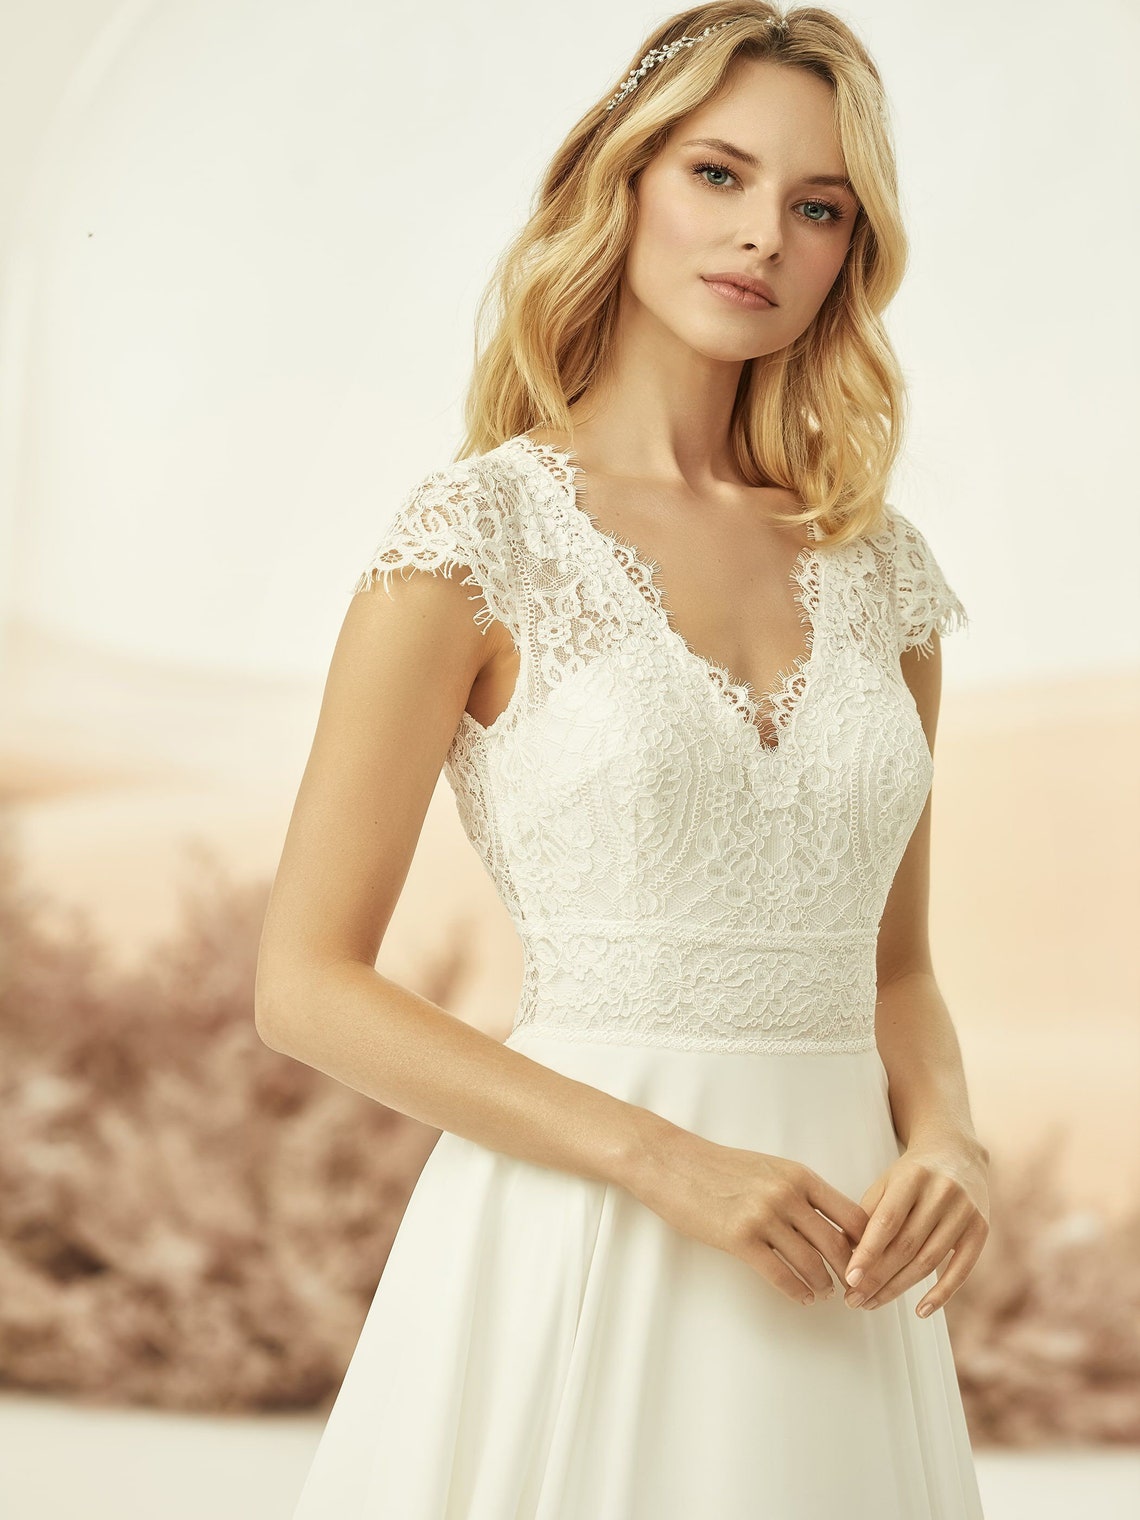 Best A Line Chiffon Wedding Dress  The ultimate guide 